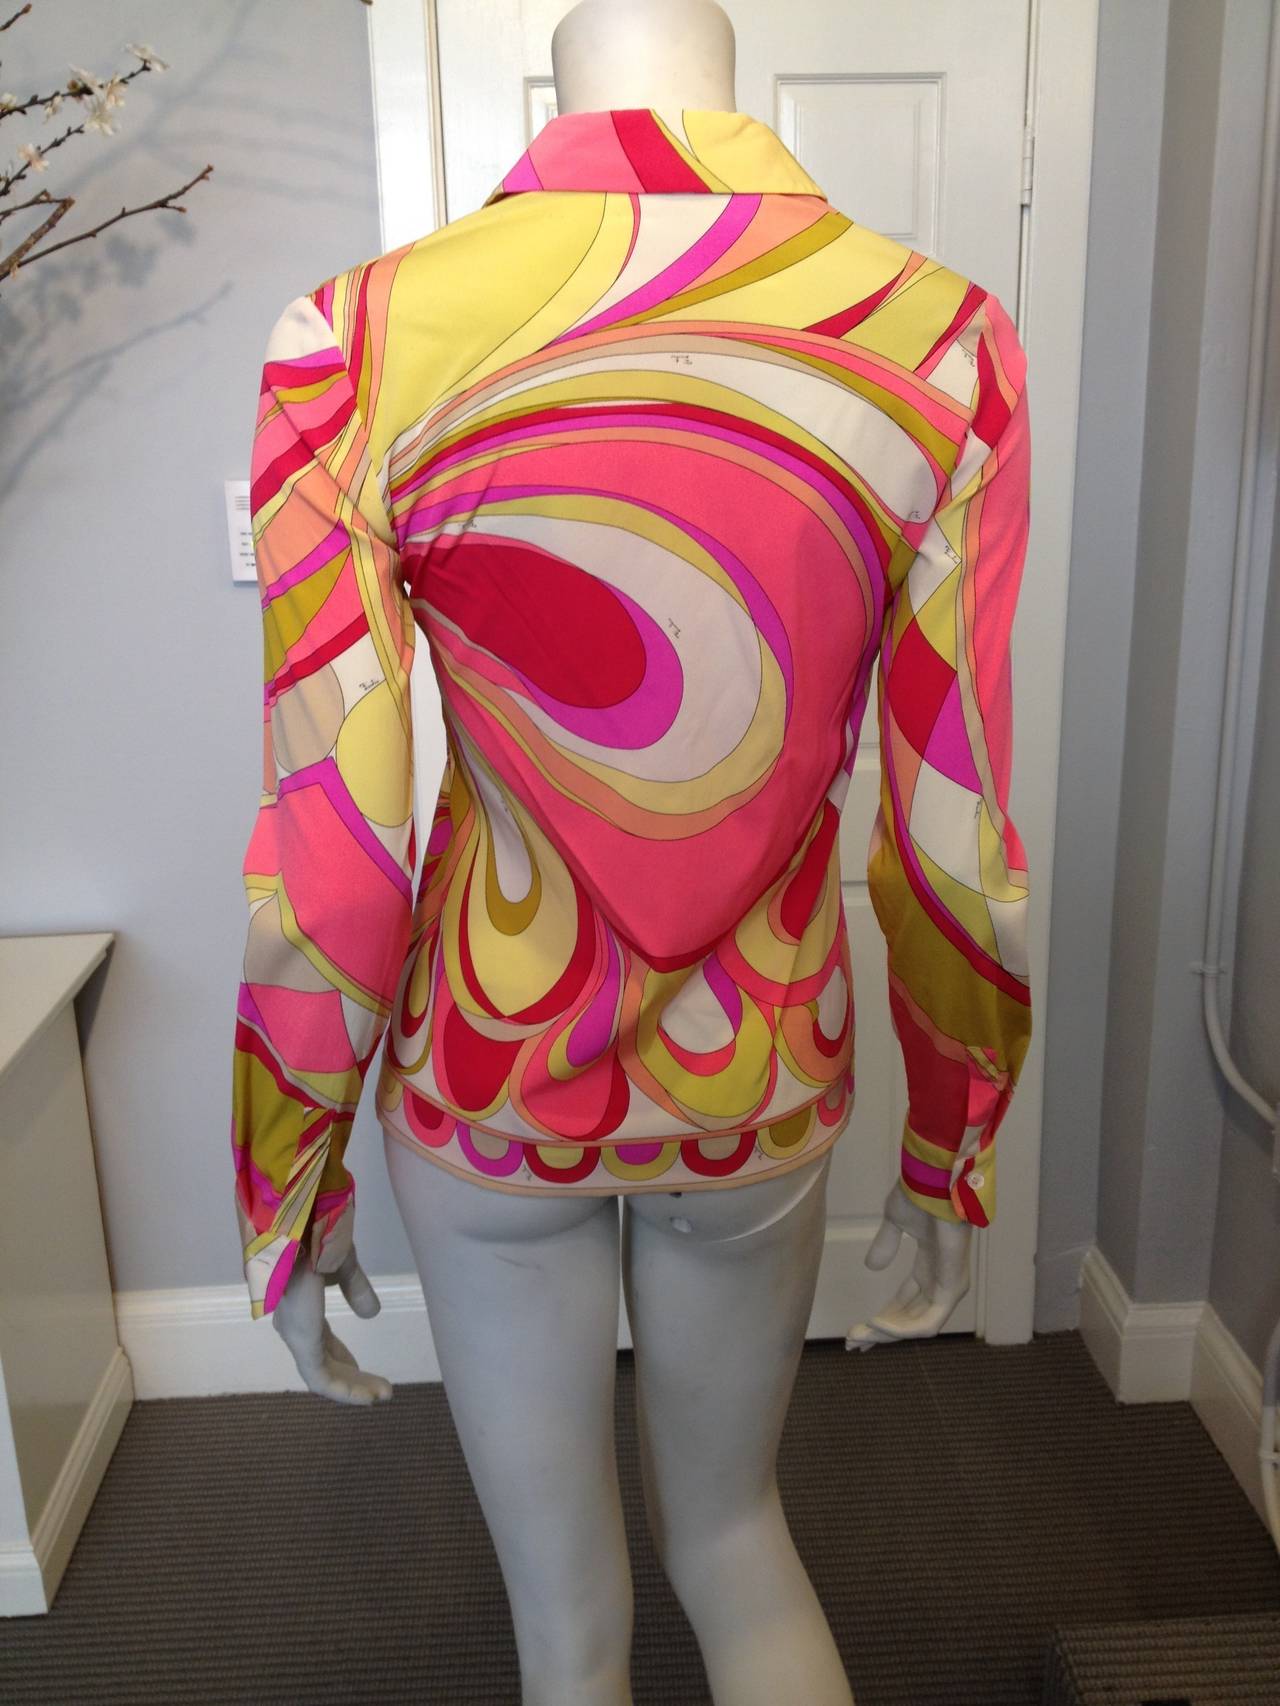 Jump into summer! Hot pink, coral, vibrant spring green, chartreuse, and white are combined in this iconic print. Pucci always adds a shot of exuberance in his eye-catching color combinations and this one is perfect for the warm, sunny months ahead!